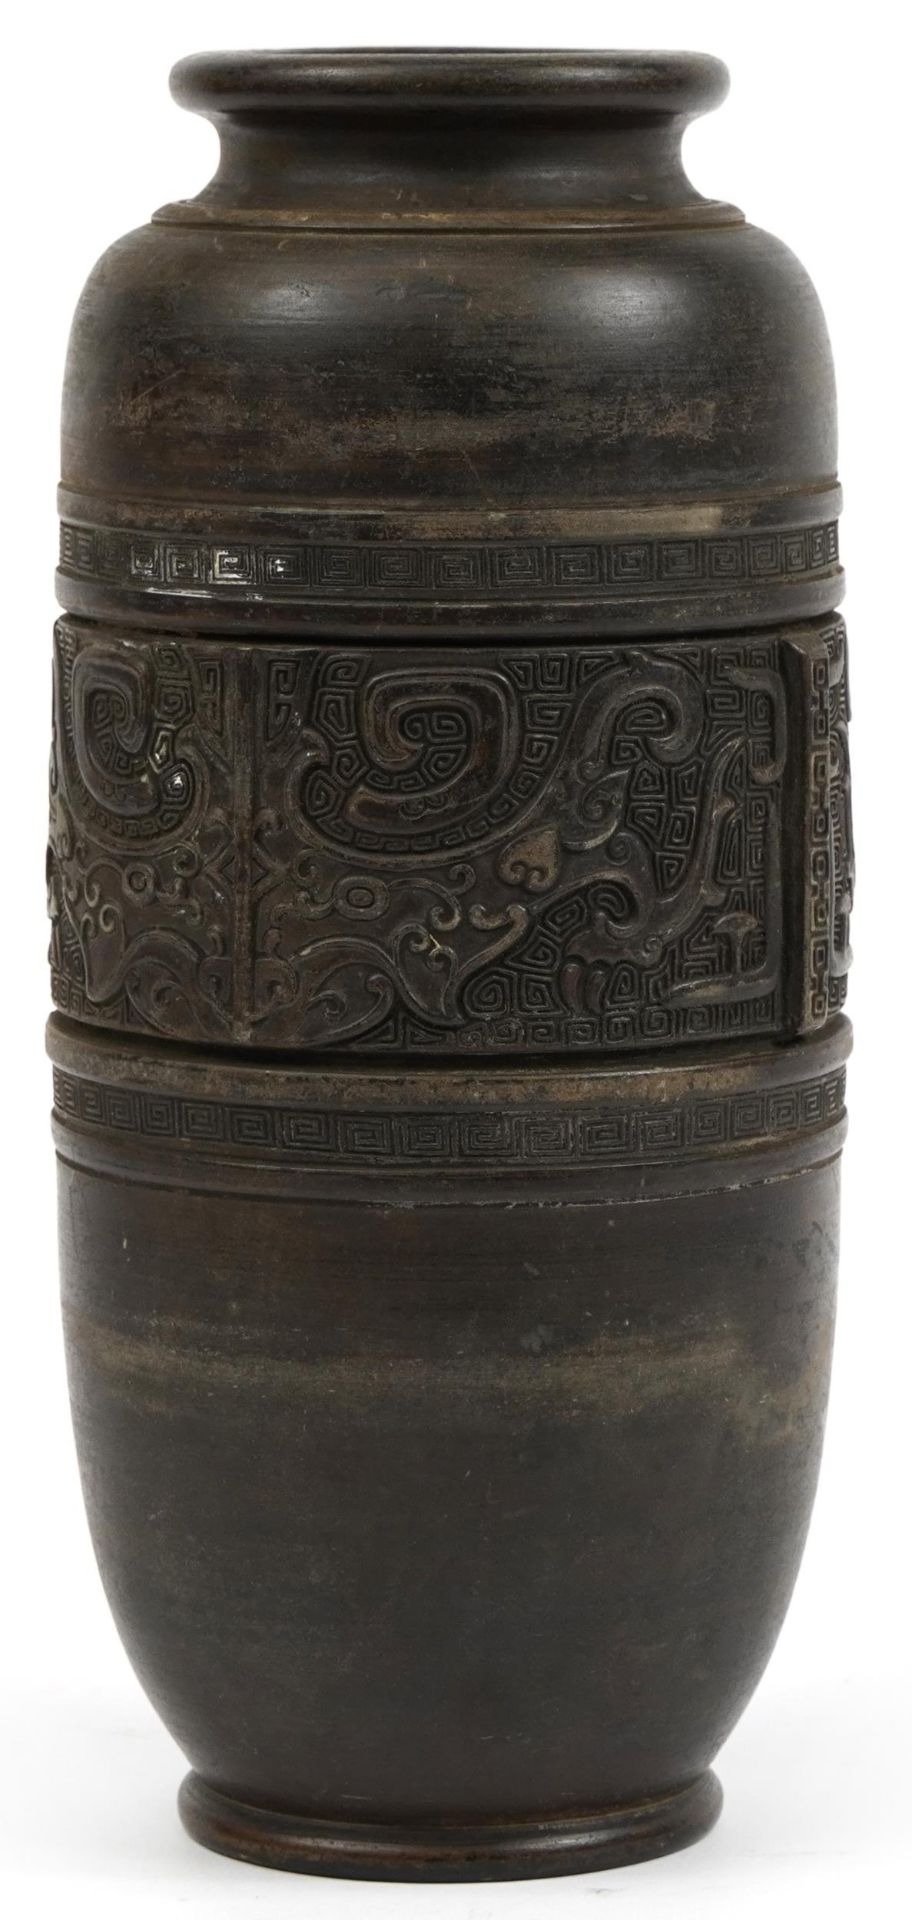 Japanese archaic style vase decorated with emblems, 31.5cm high